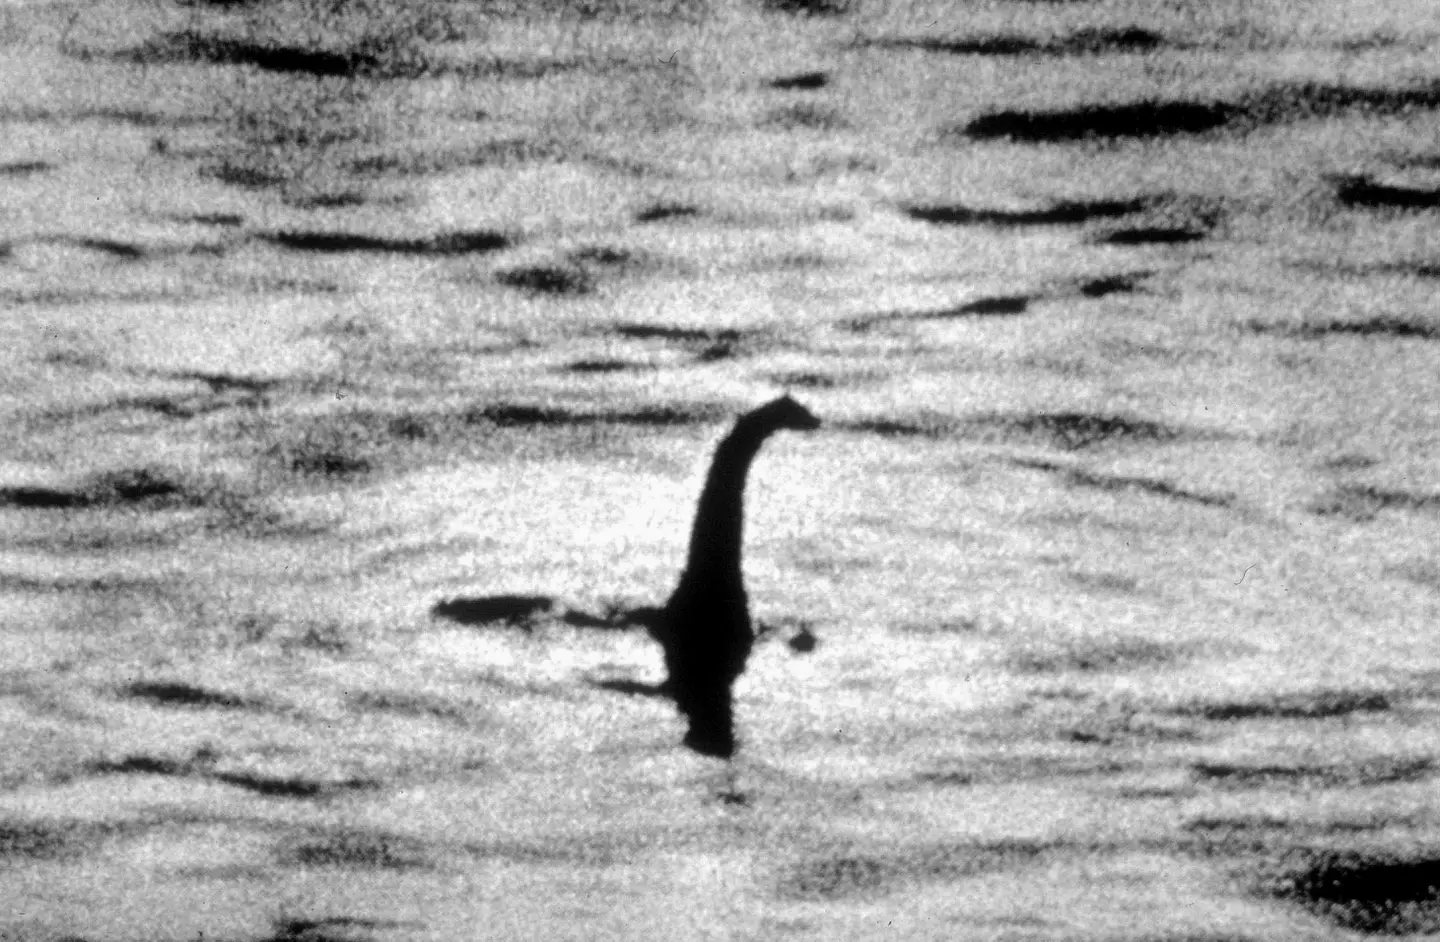 So, here's a popular picture of Nessie - though it is a hoax.